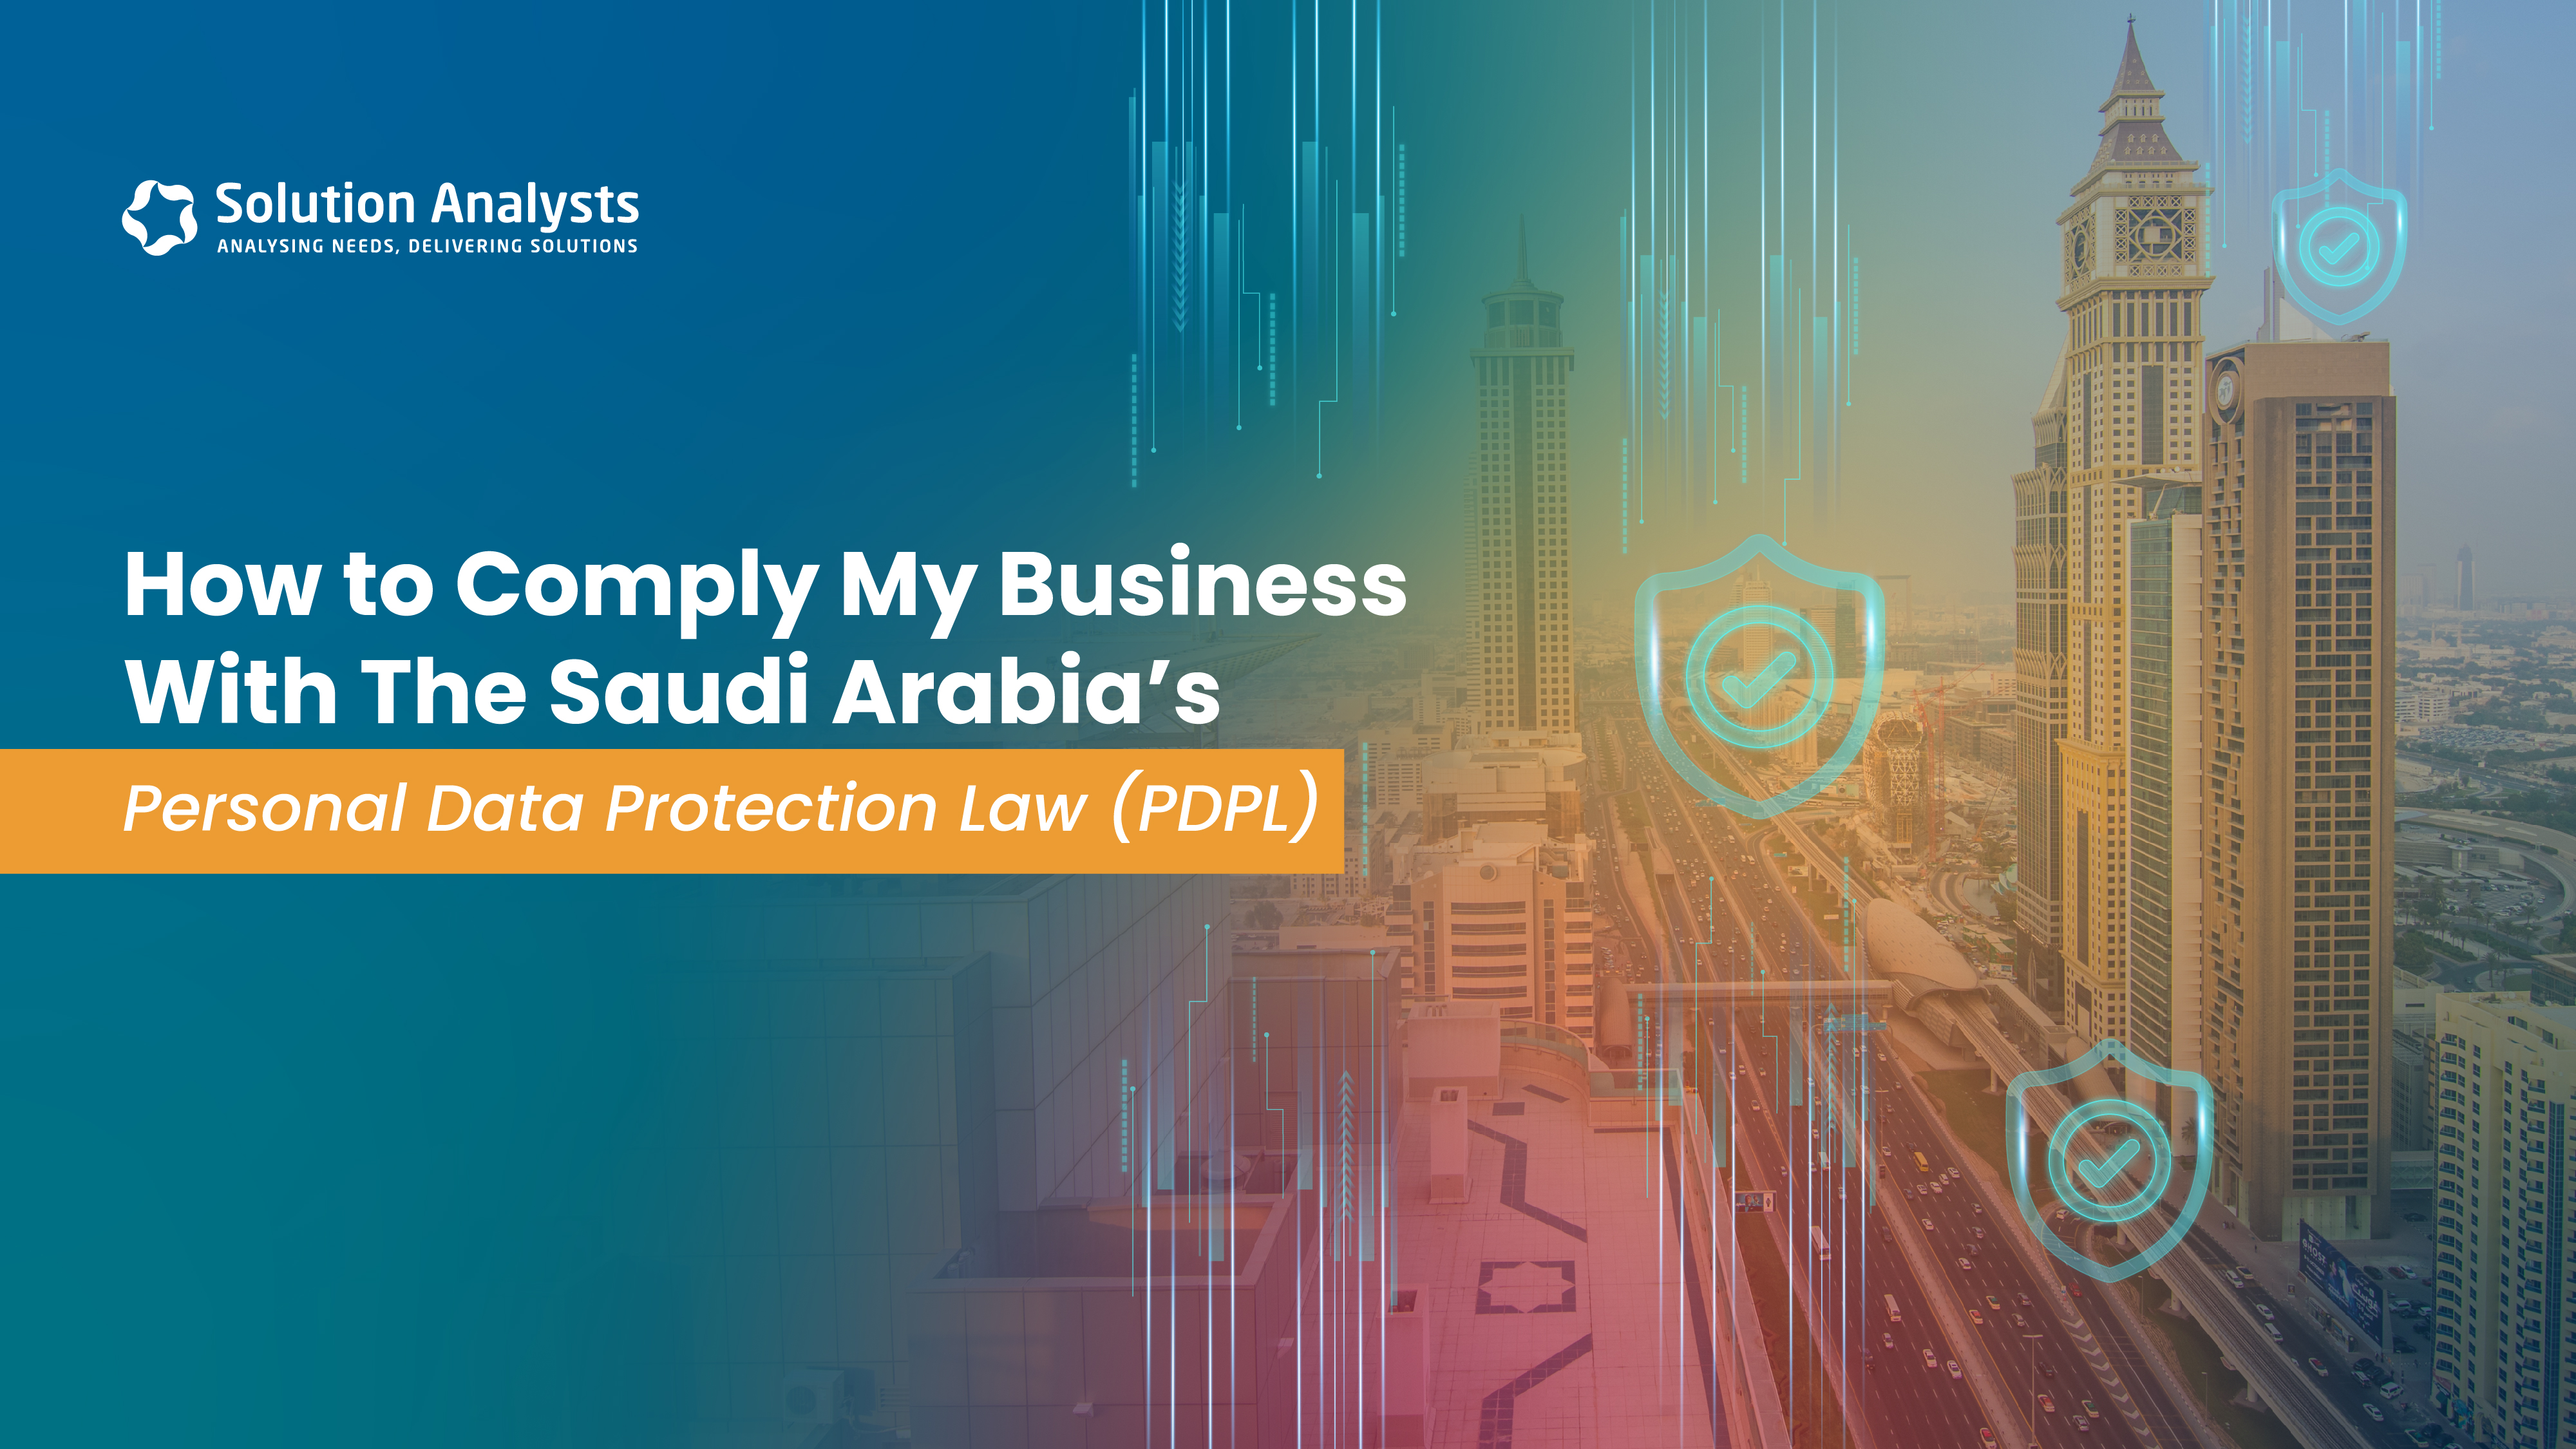 How to Comply My Business With The Saudi Arabia’s Personal Data Protection Law (PDPL)